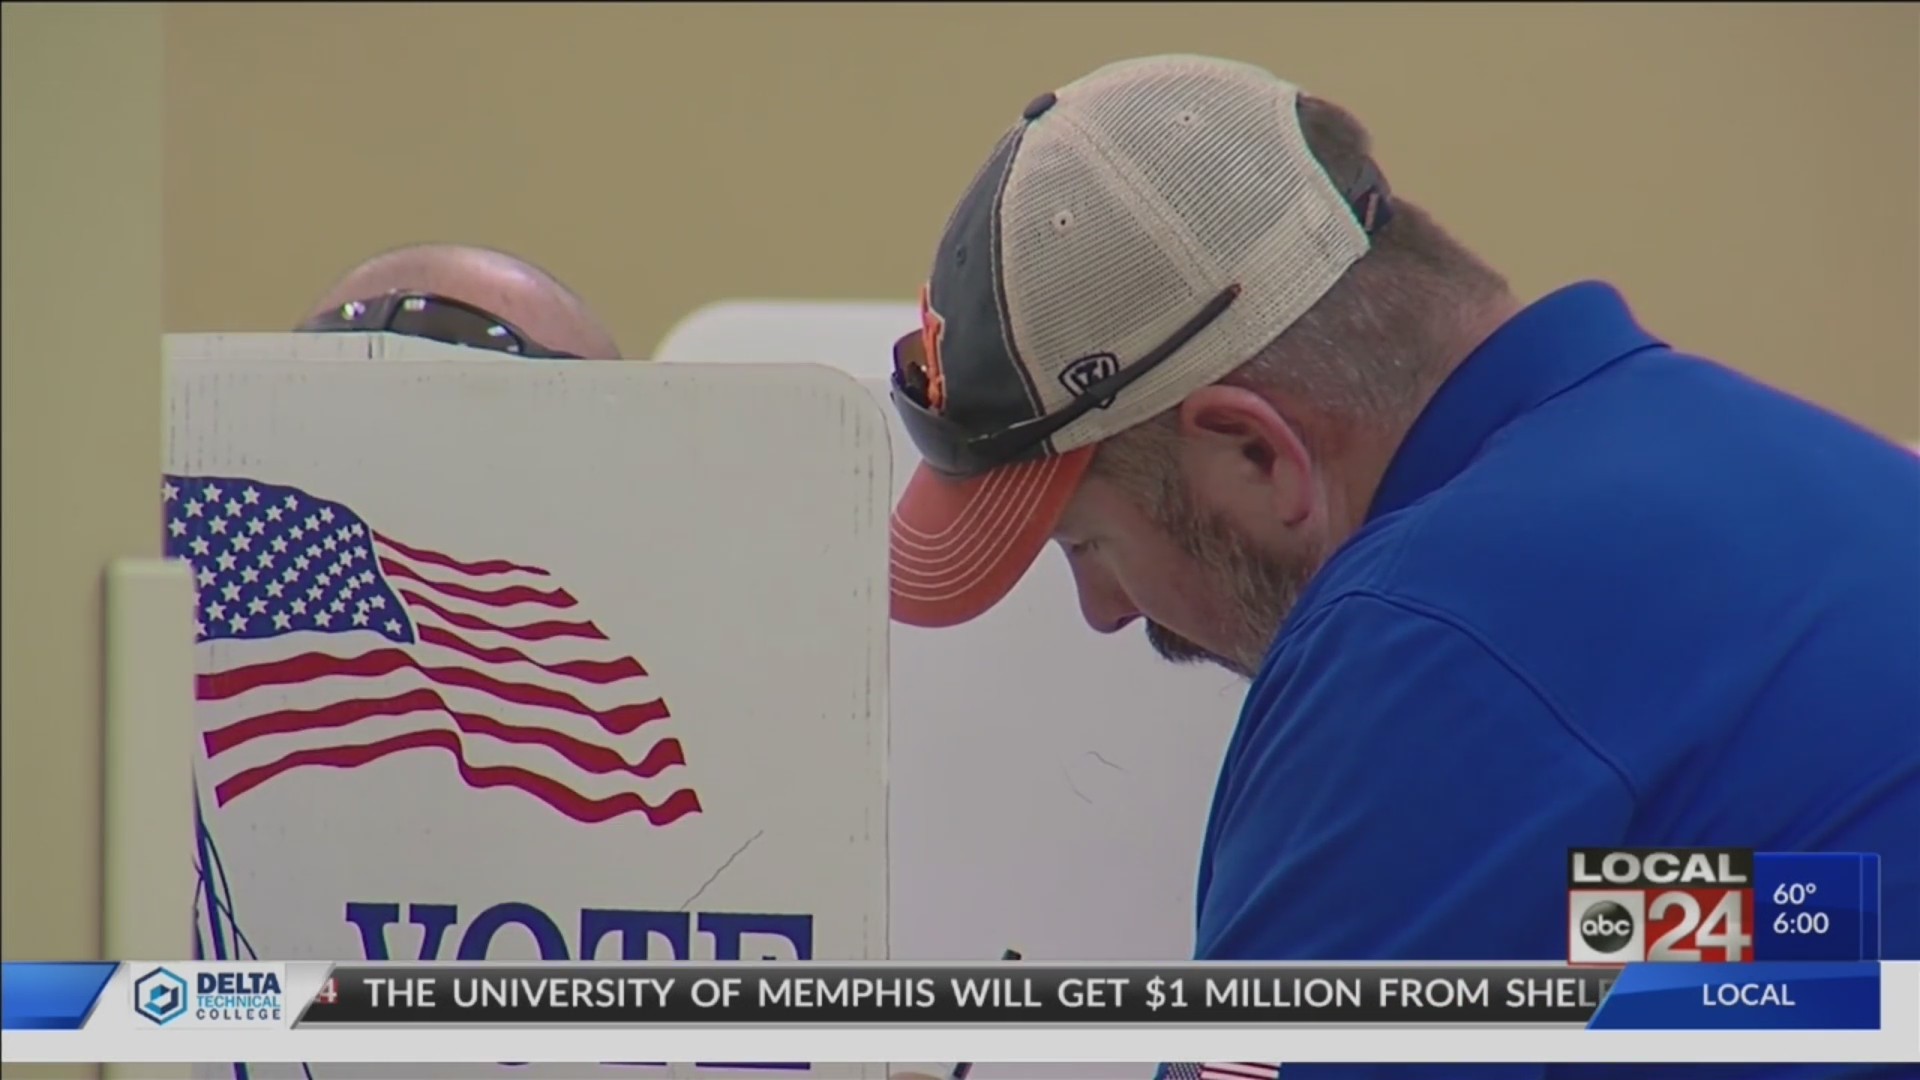 Magnolia State voters making their message heard at the ballot box this Election Day